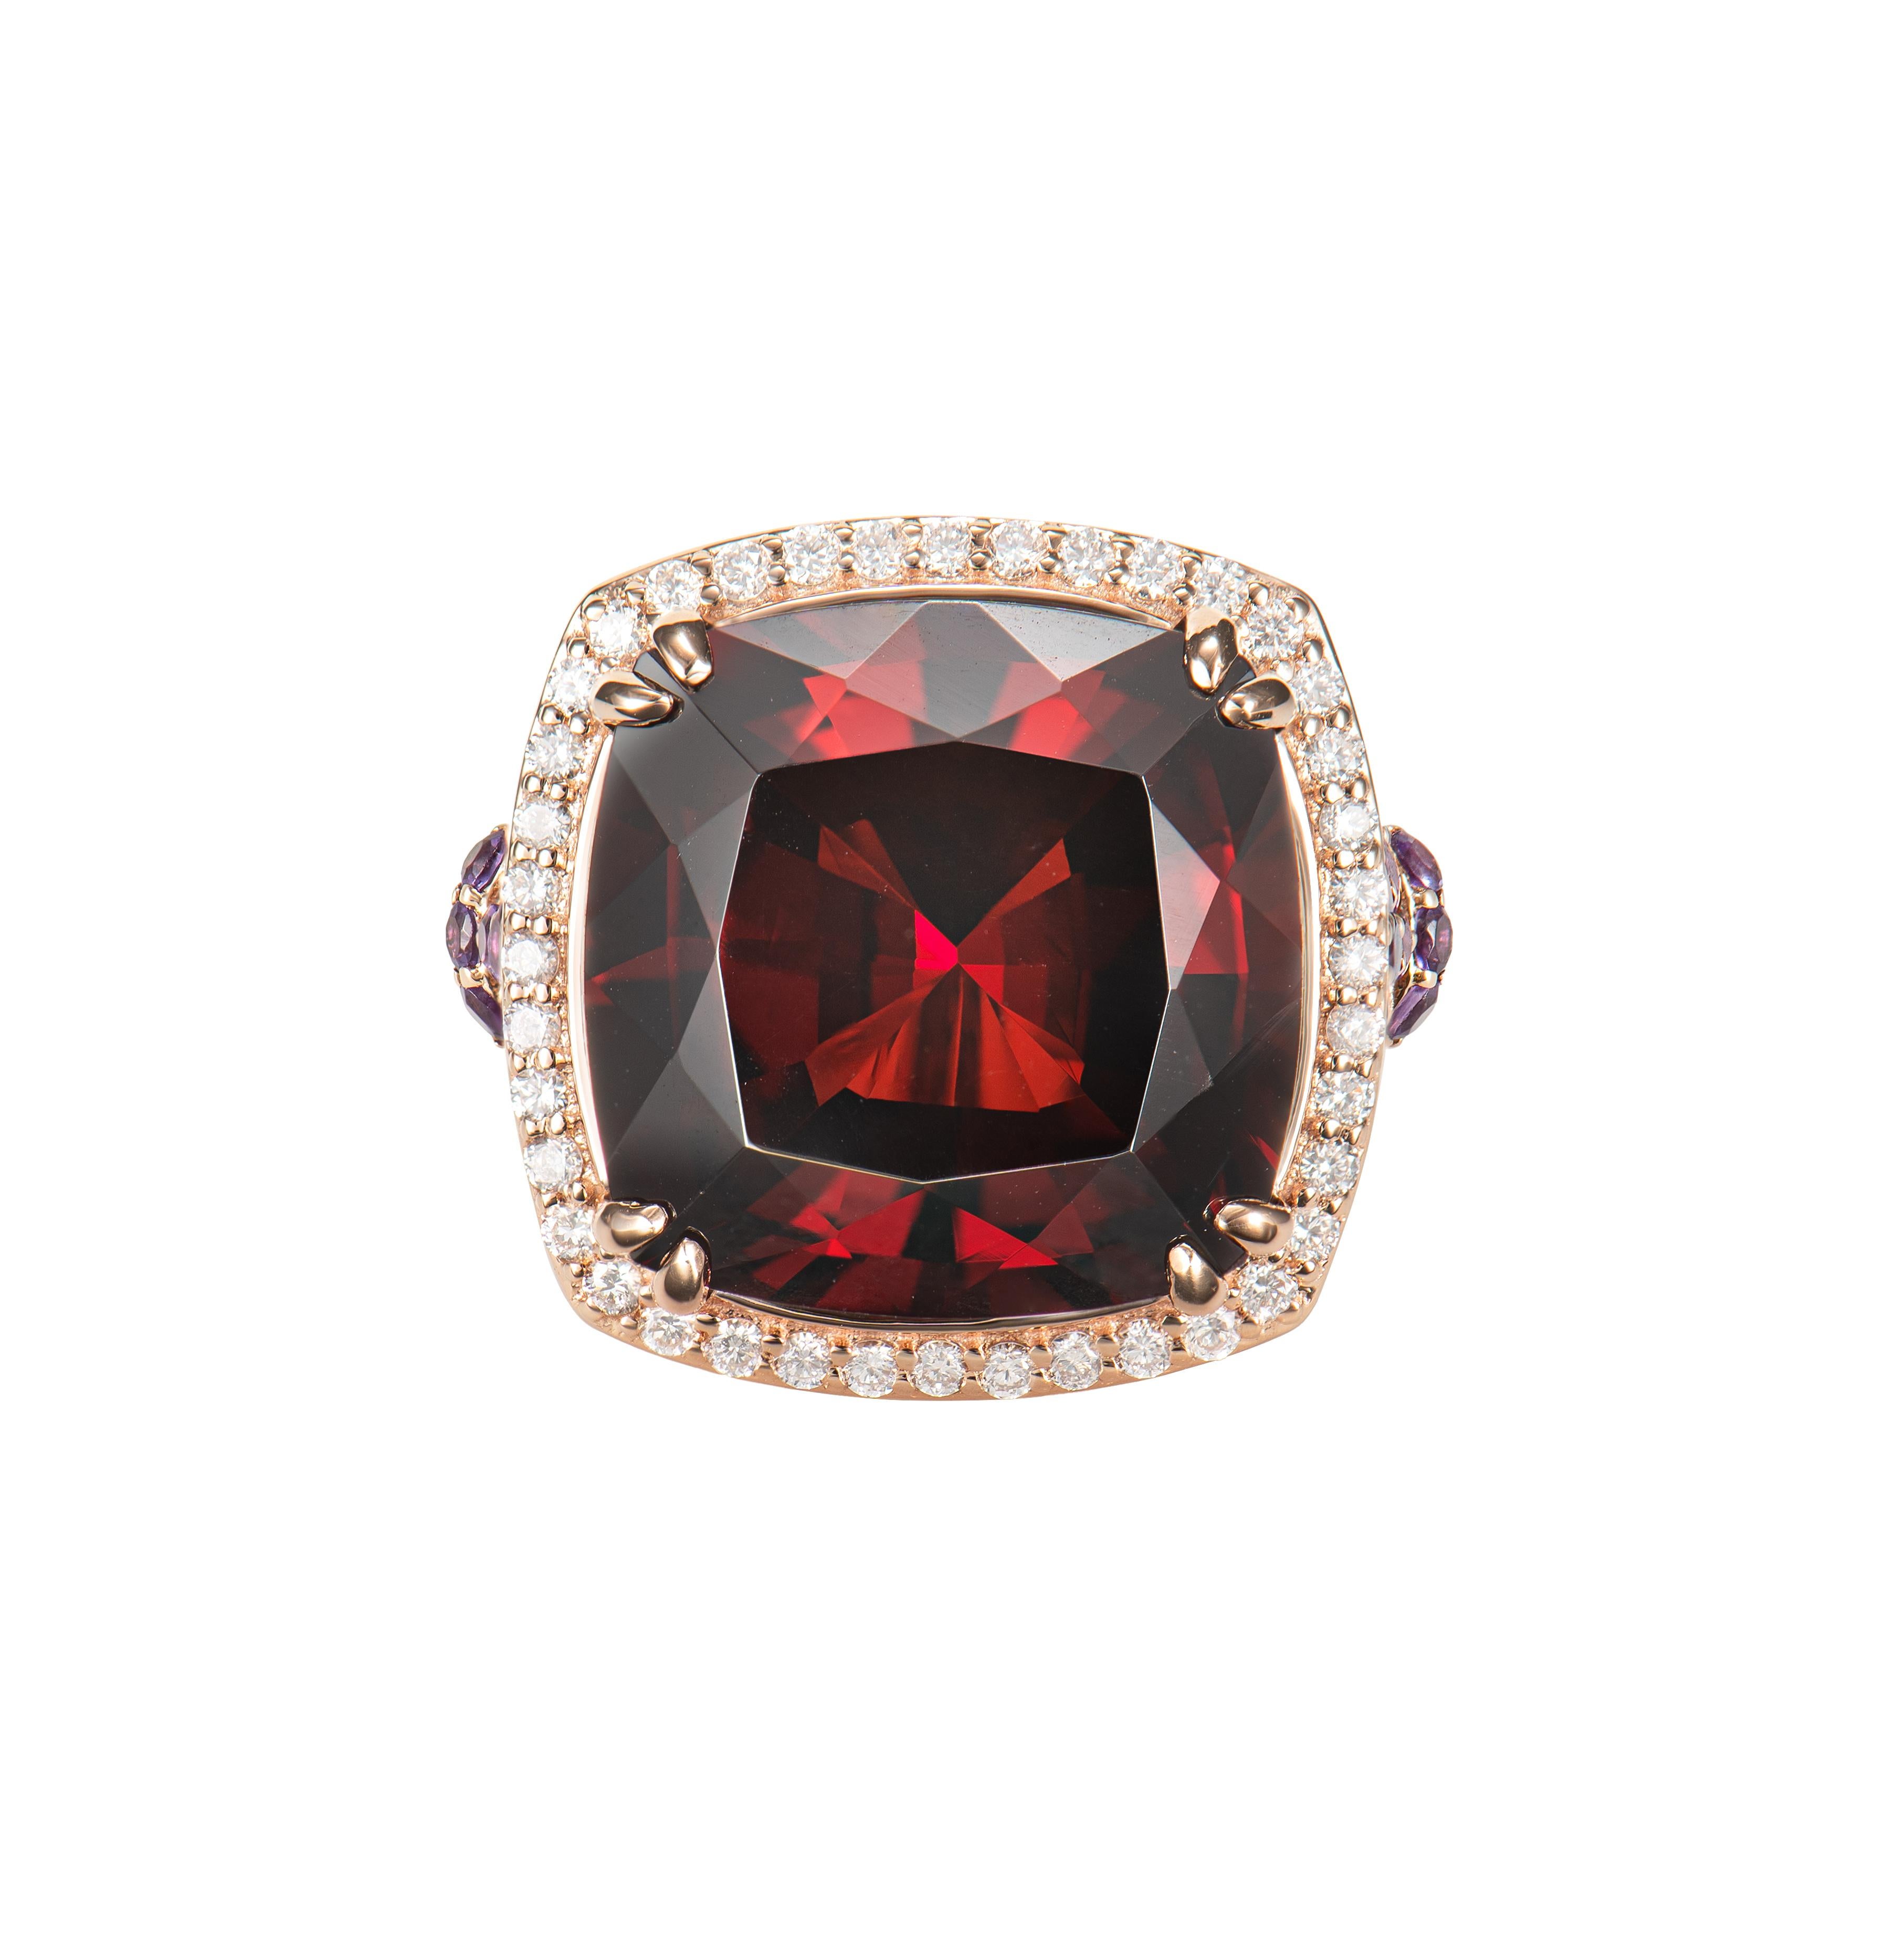 Contemporary 13.99 Carat Garnet Cocktail Ring in 18Karat Rose Gold with Amethyst and Diamond. For Sale